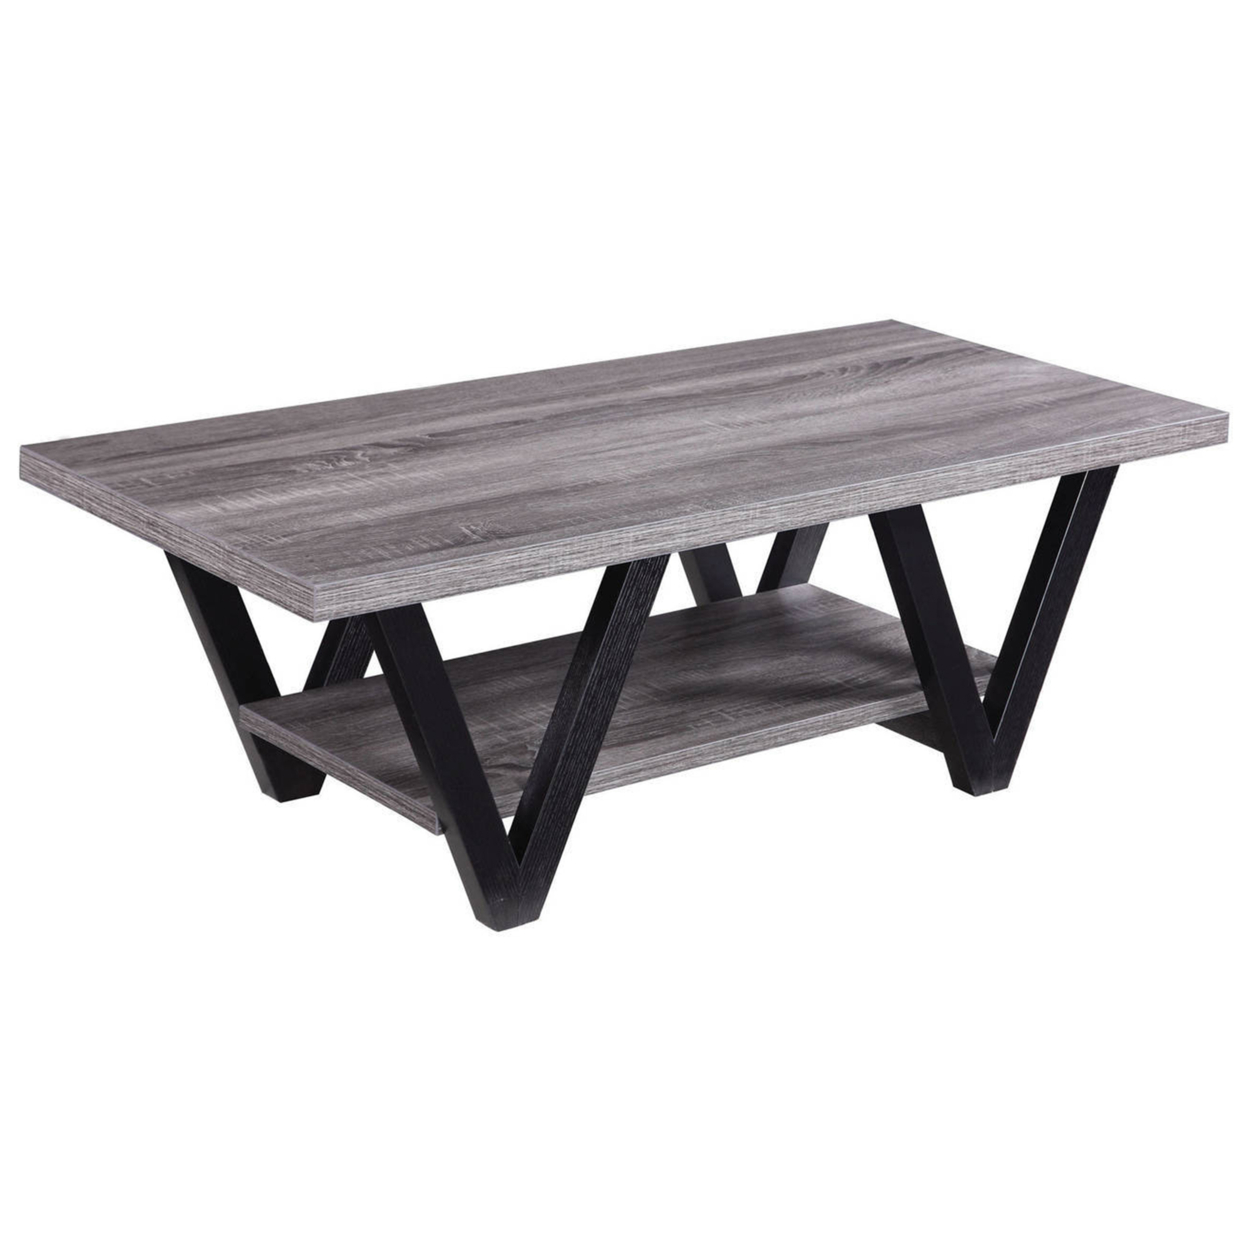 Zigzag Contemporary Solid Wooden Coffee Table With Bottom Shelf, Gray And Black- Saltoro Sherpi